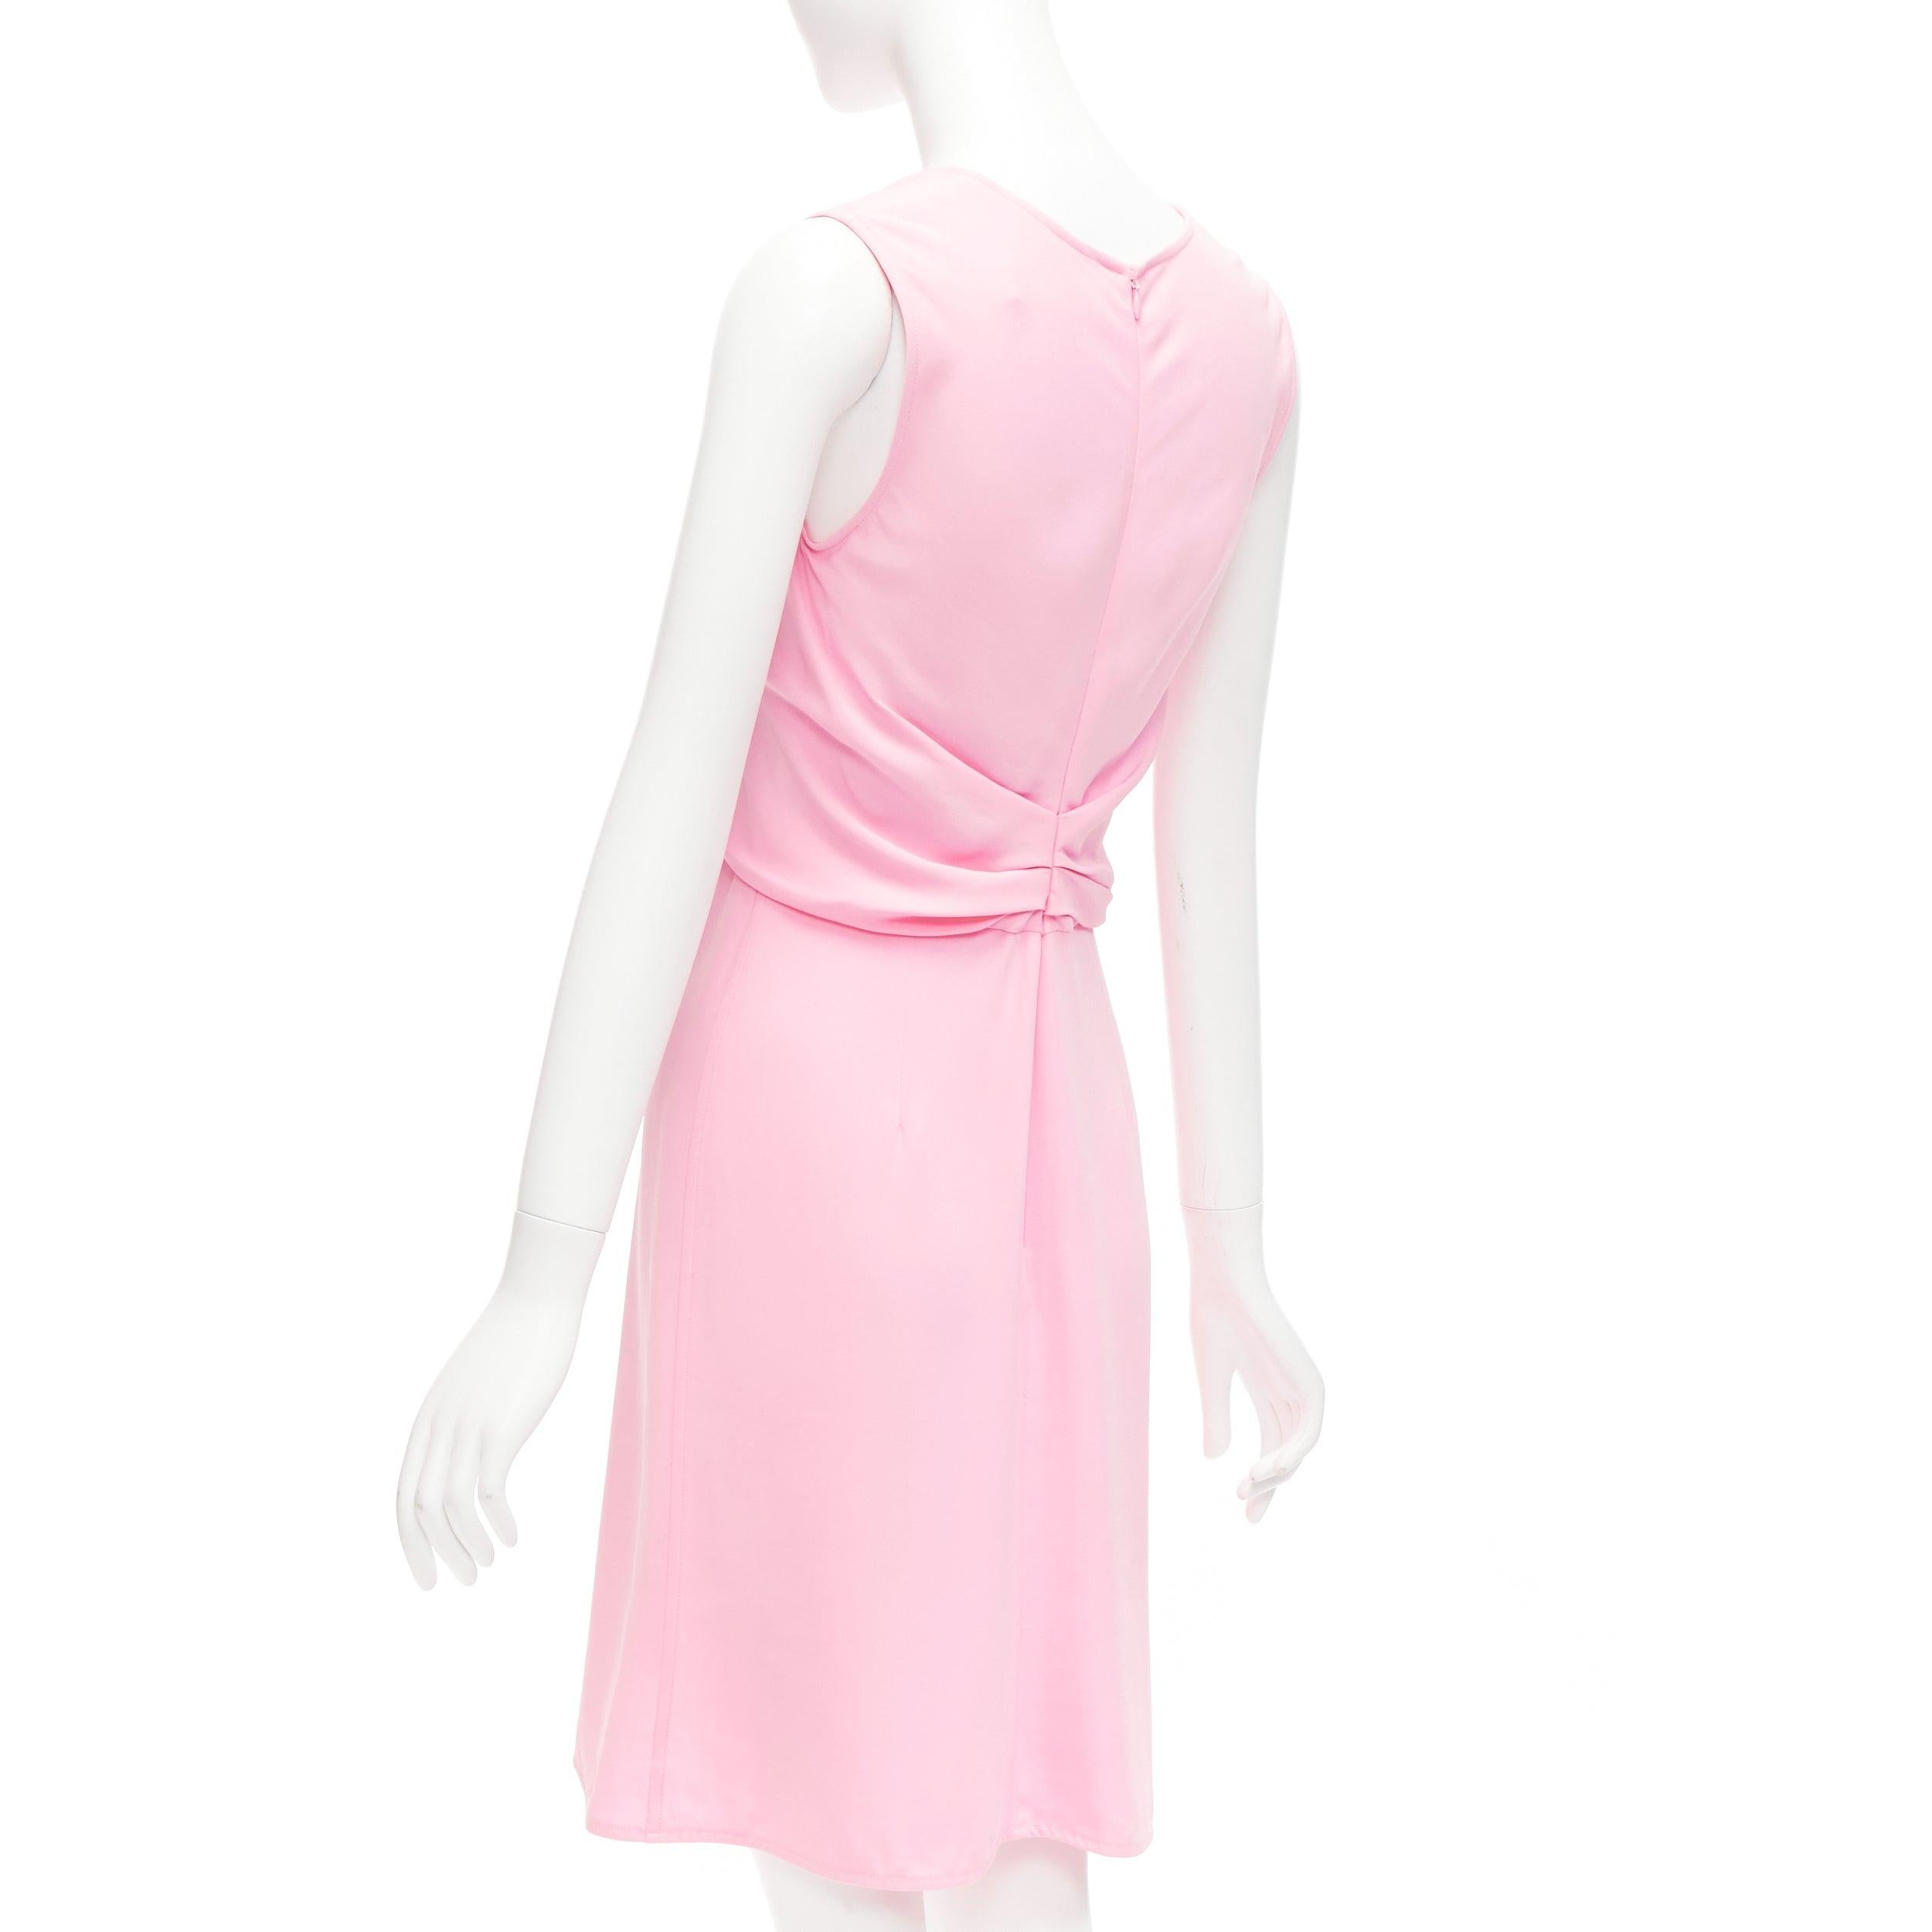 VICTORIA BECKHAM pink silky drape front ruched back sleeveless shift dress For Sale 2